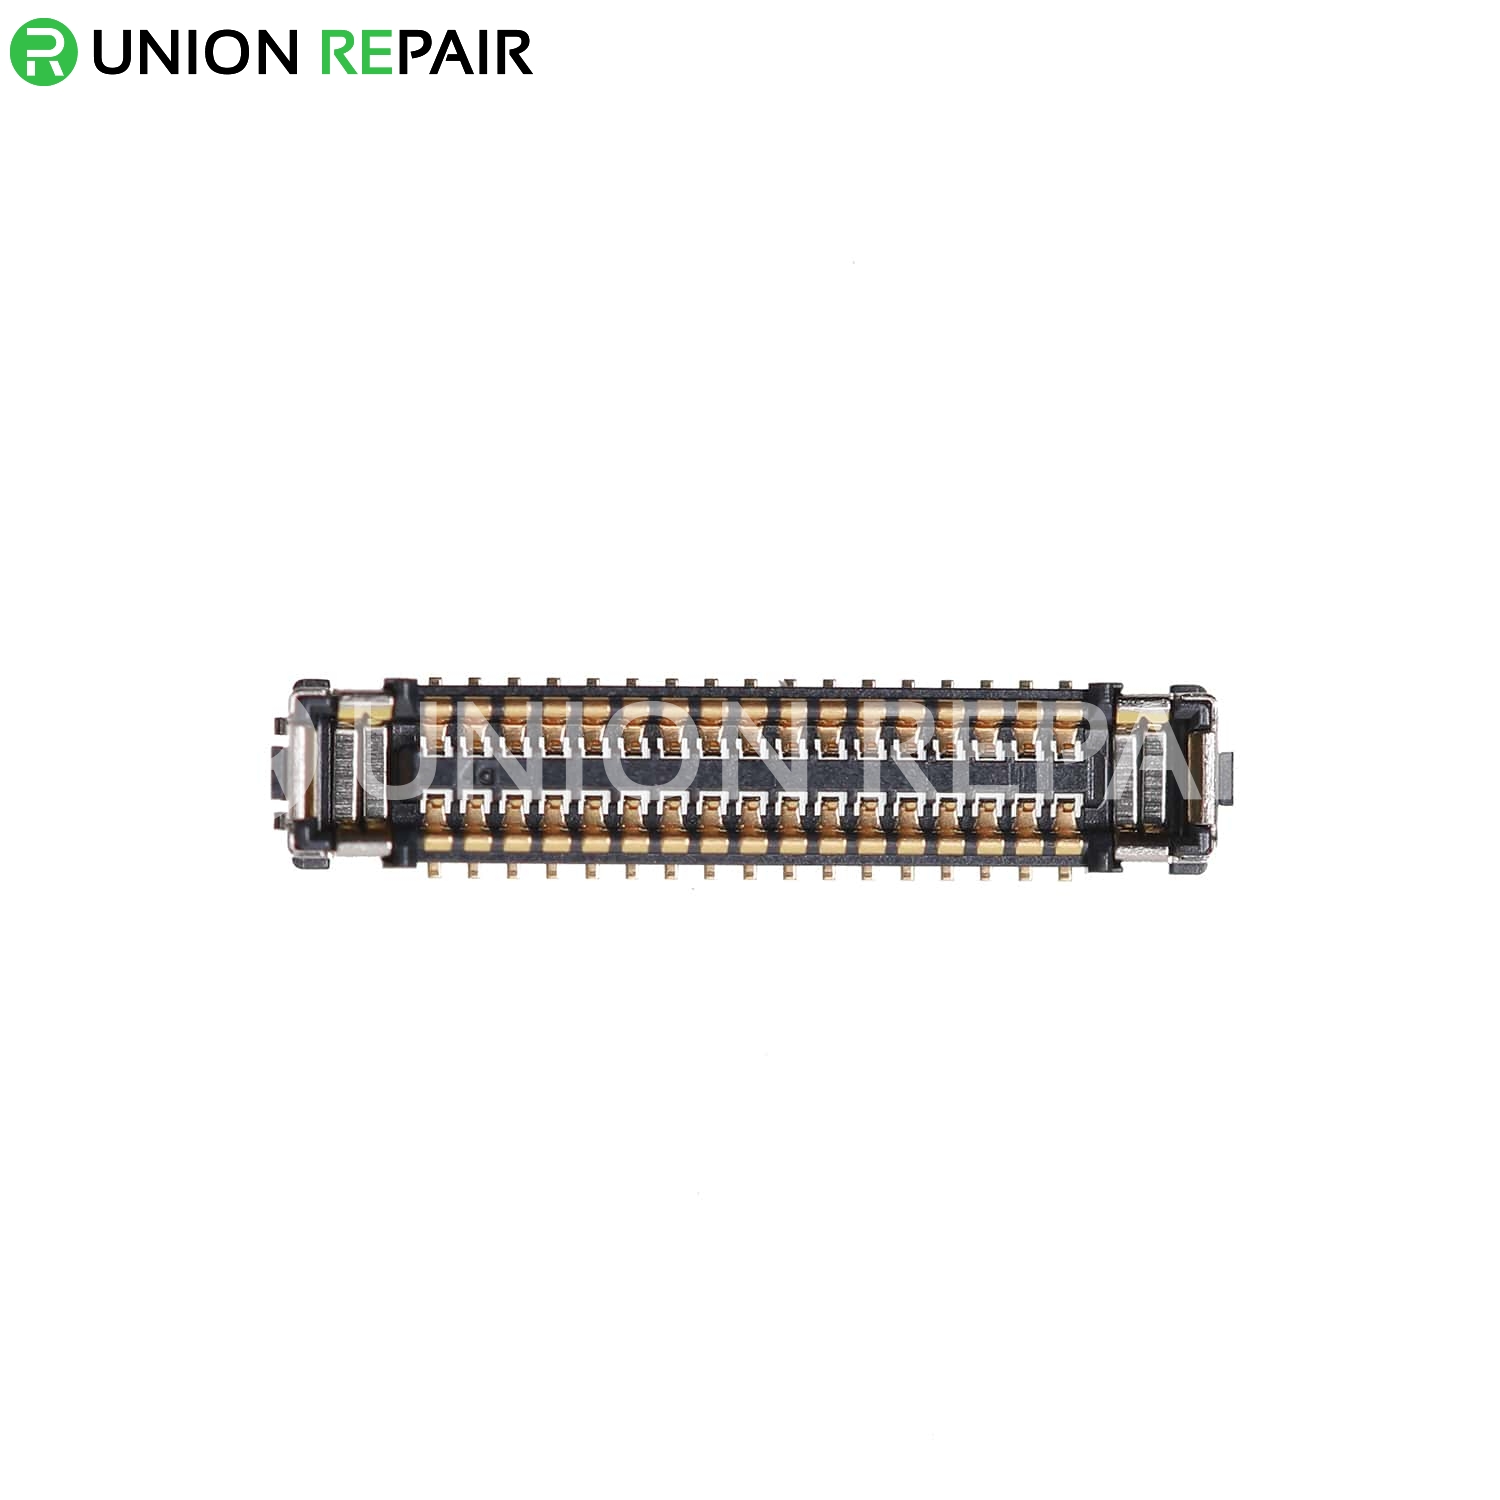 Replacement for iPhone XS MAX LCD Connector Port Onboard